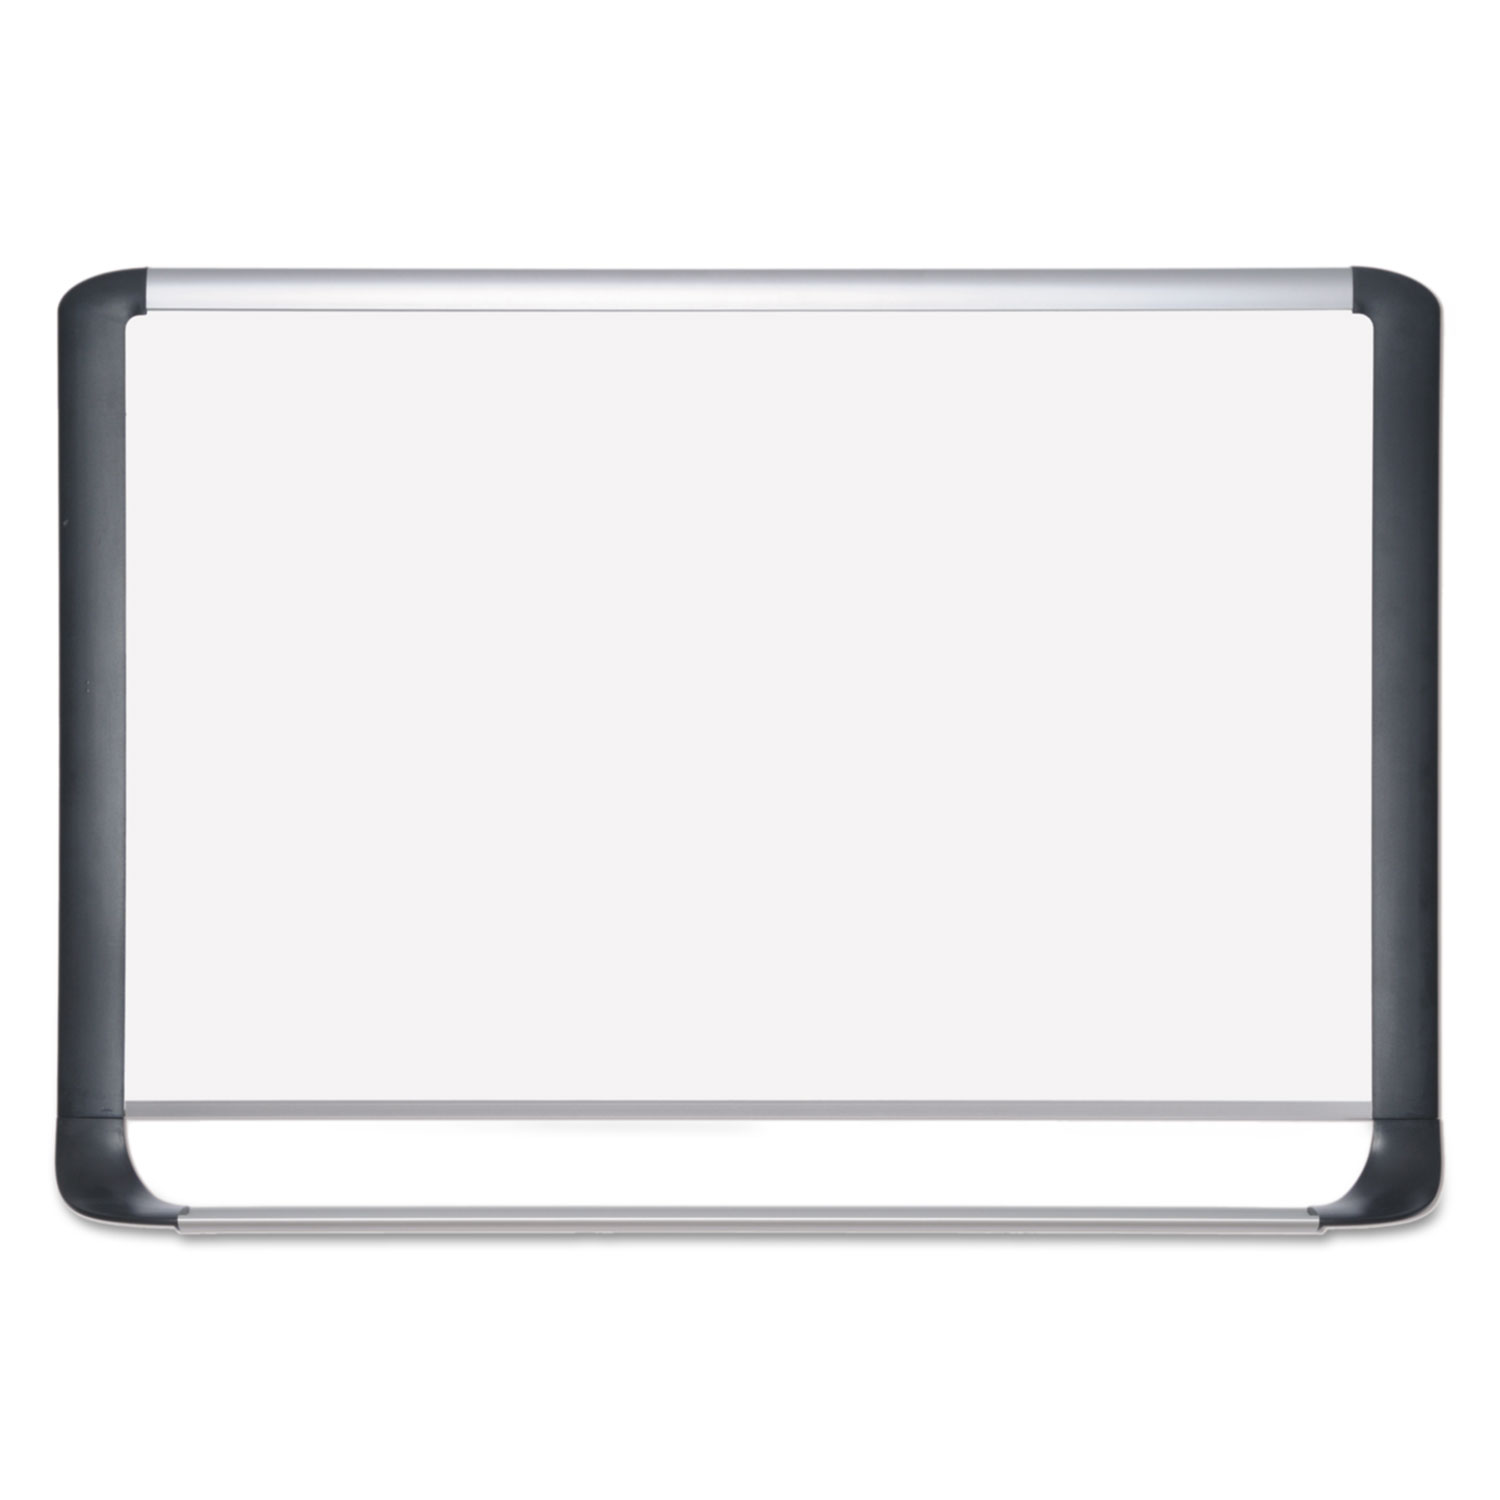  MasterVision MVI030201 Lacquered steel magnetic dry erase board, 24 x 36, Silver/Black (BVCMVI030201) 